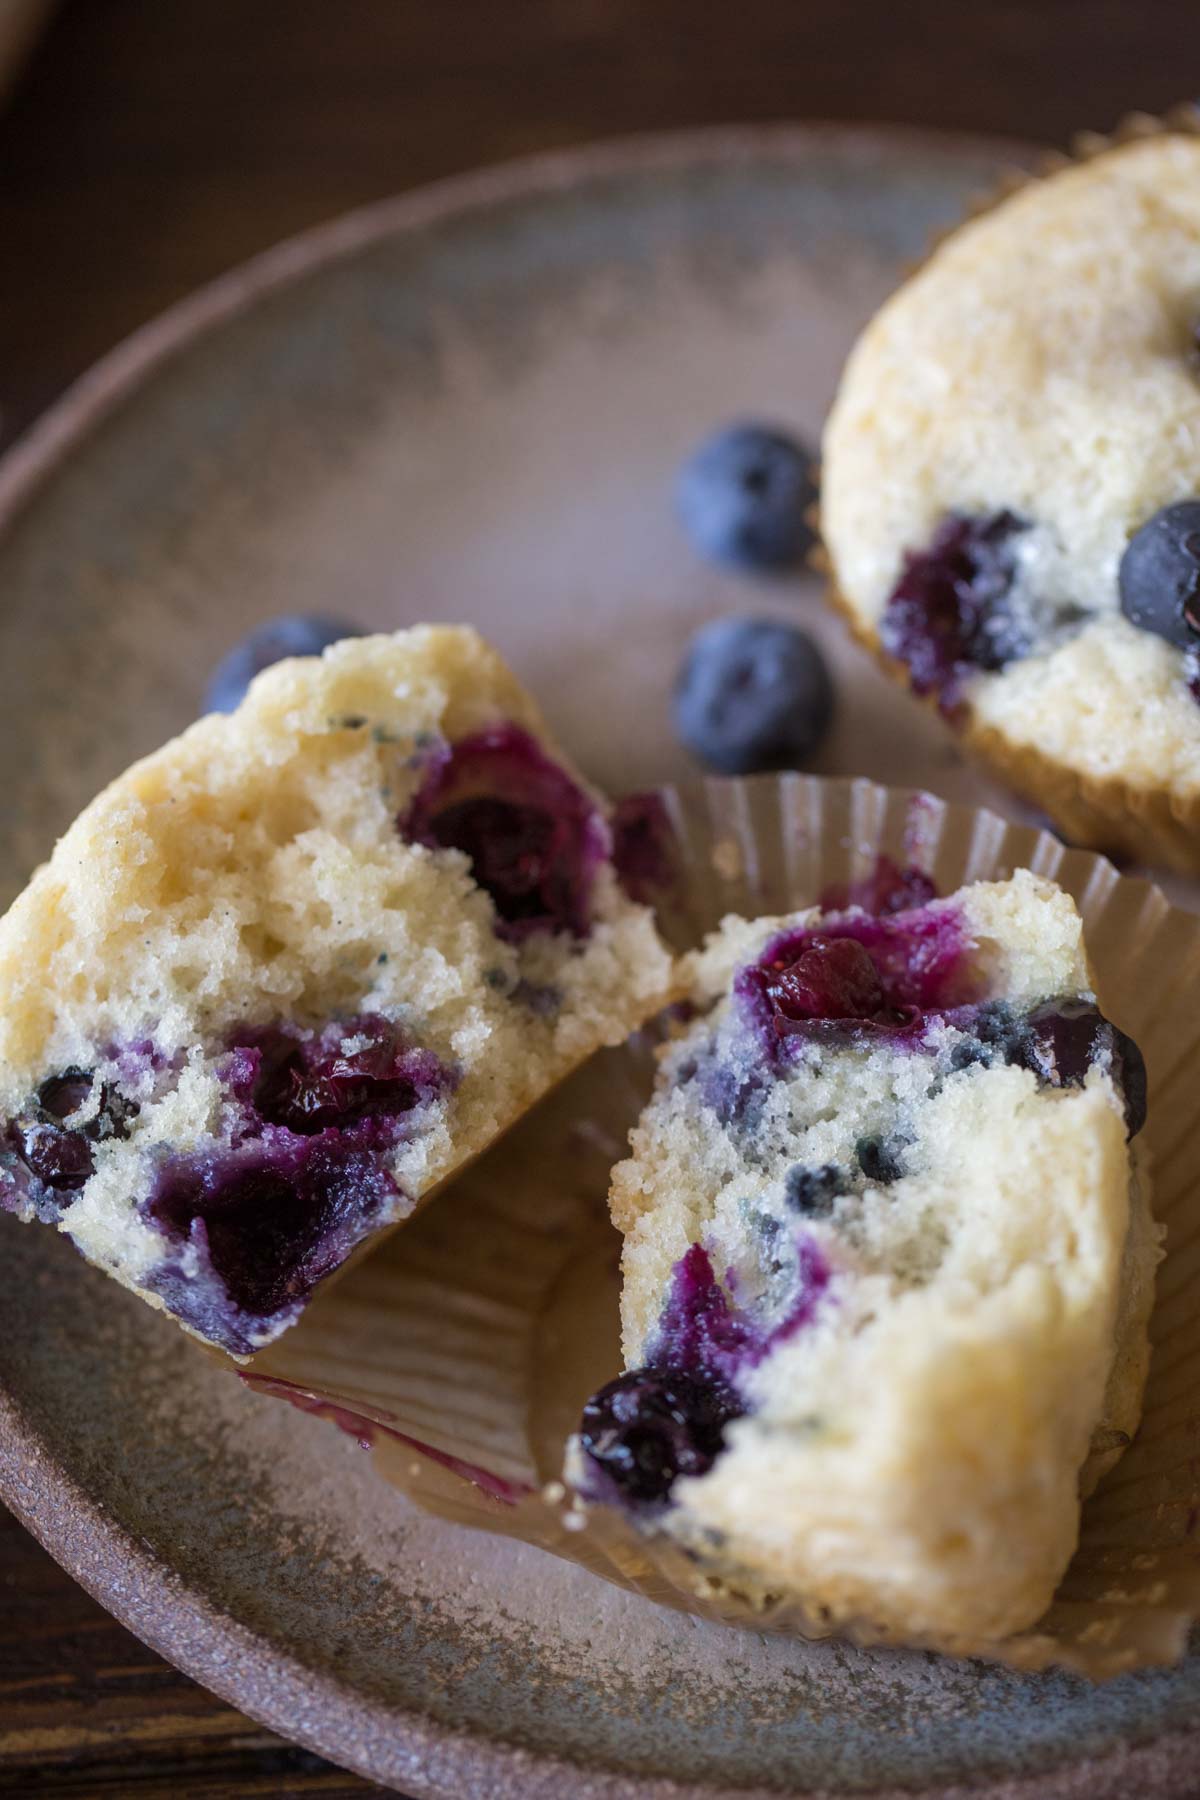 A Vanilla Blueberry Buttermilk Muffin split in half, sitting on a plate with another whole muffin and some blueberries. 